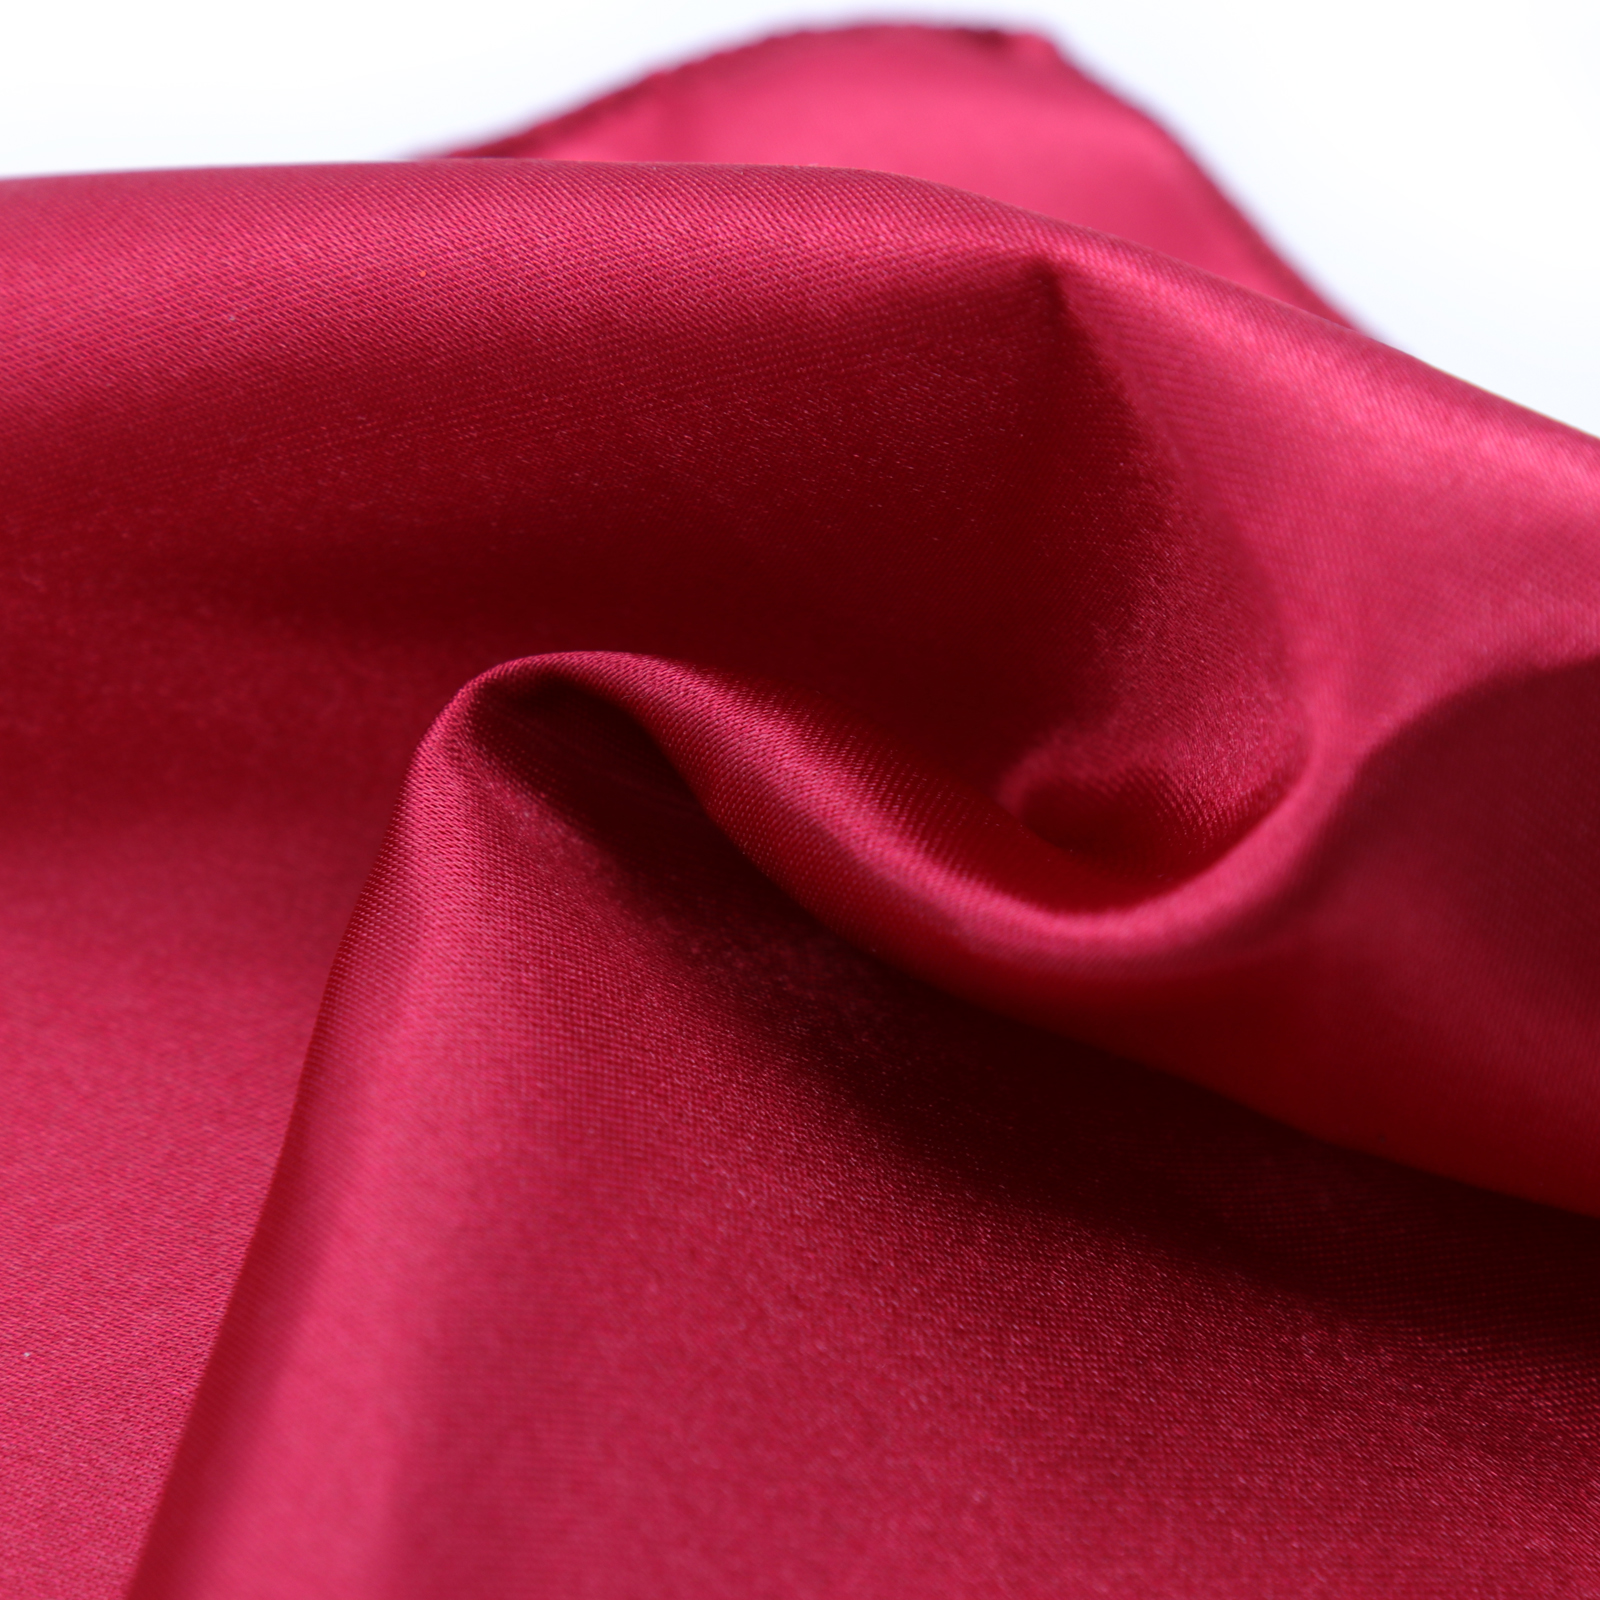 25PCS Square Satin Table Napkin 30cm Pocket Handkerchief Cloth For Wedding Decoration Event Party Hotel Home Supplies White Red